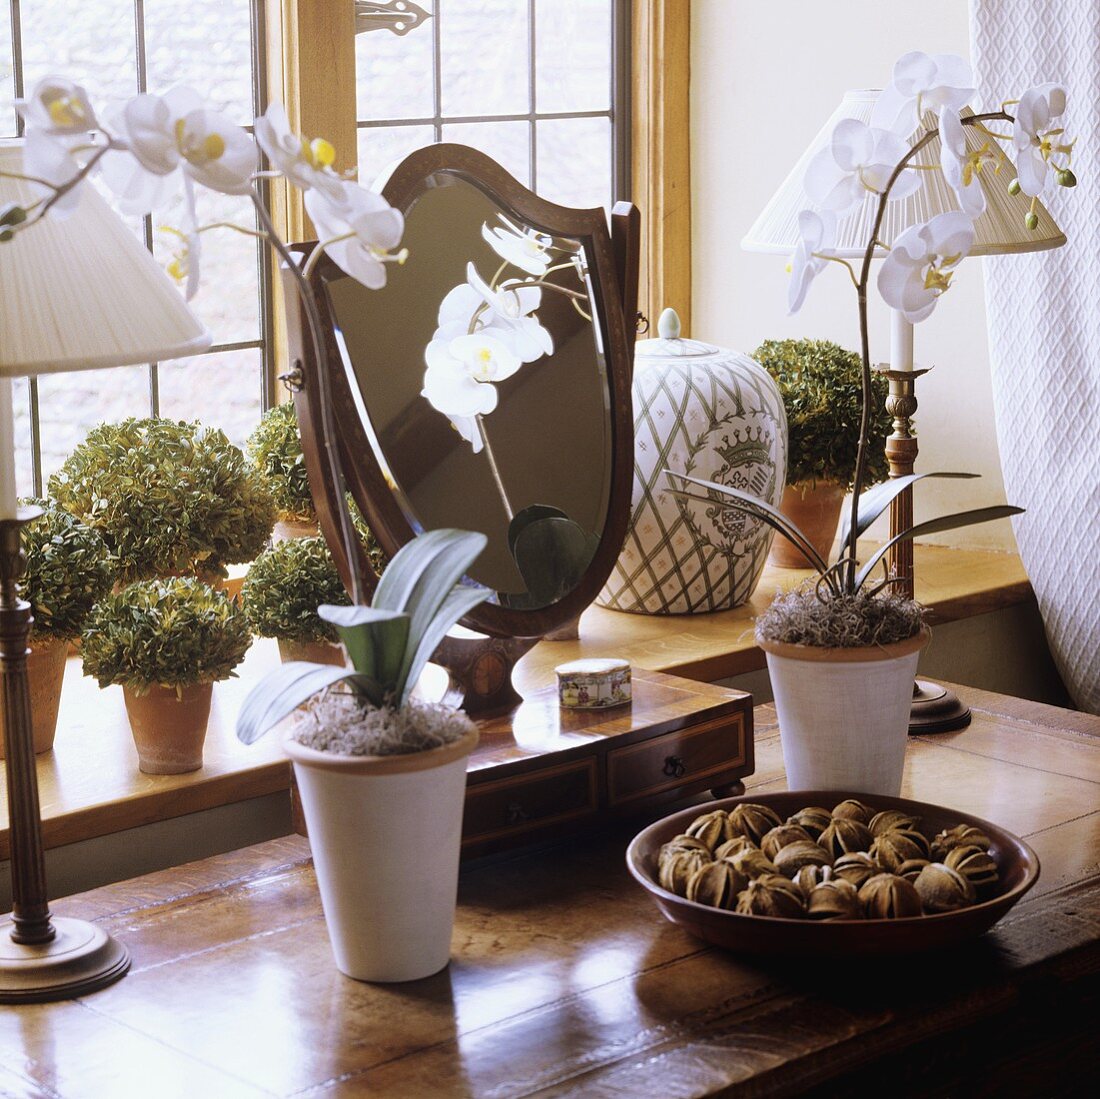 White orchids and a table lamp with a white shade on a table in front of a window